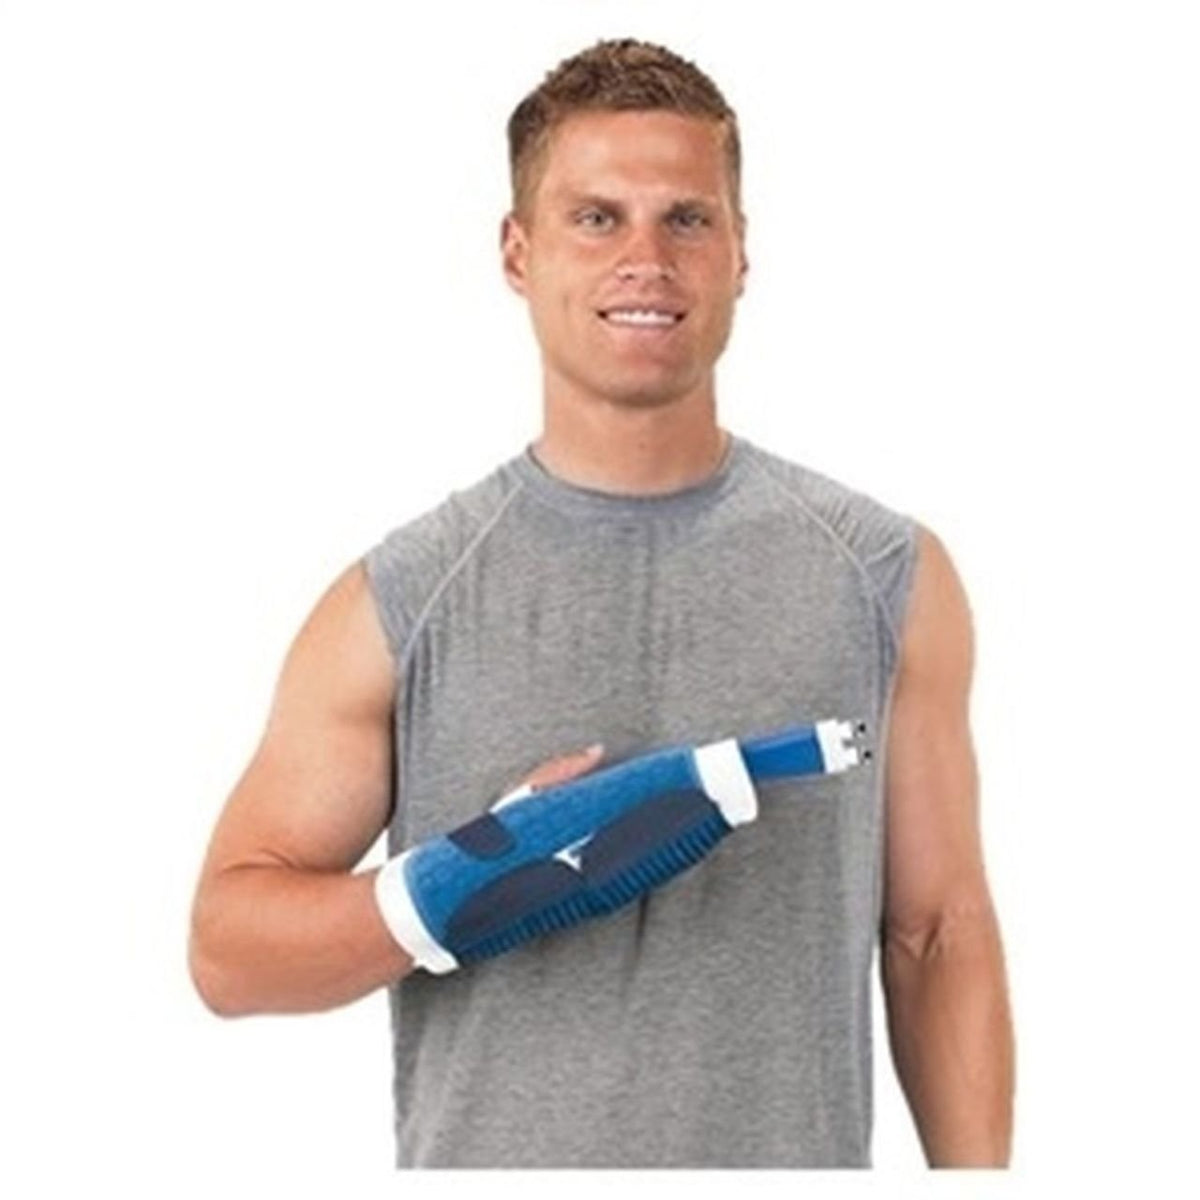 New Breg Cold Therapy Polar care wrap-on pad NOT FOR KODIAK MACHINES - Mars Med Supply